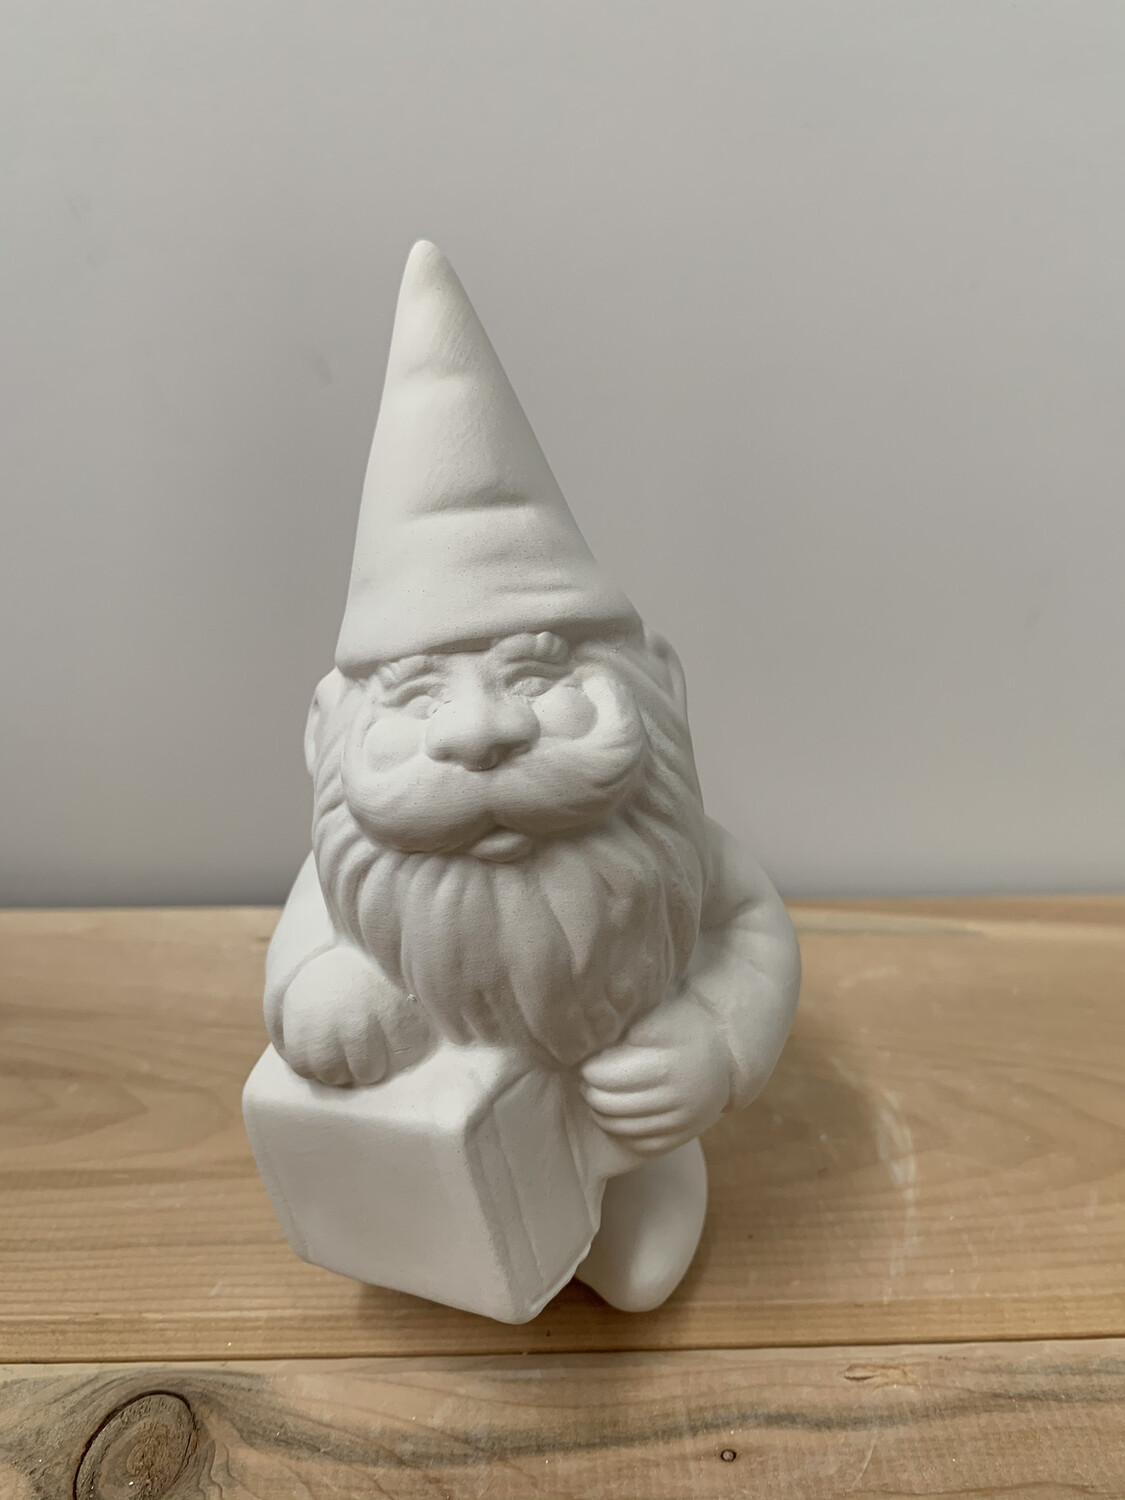 Paint Your Own Pottery - Ceramic
Gnome Figurine Painting Kit